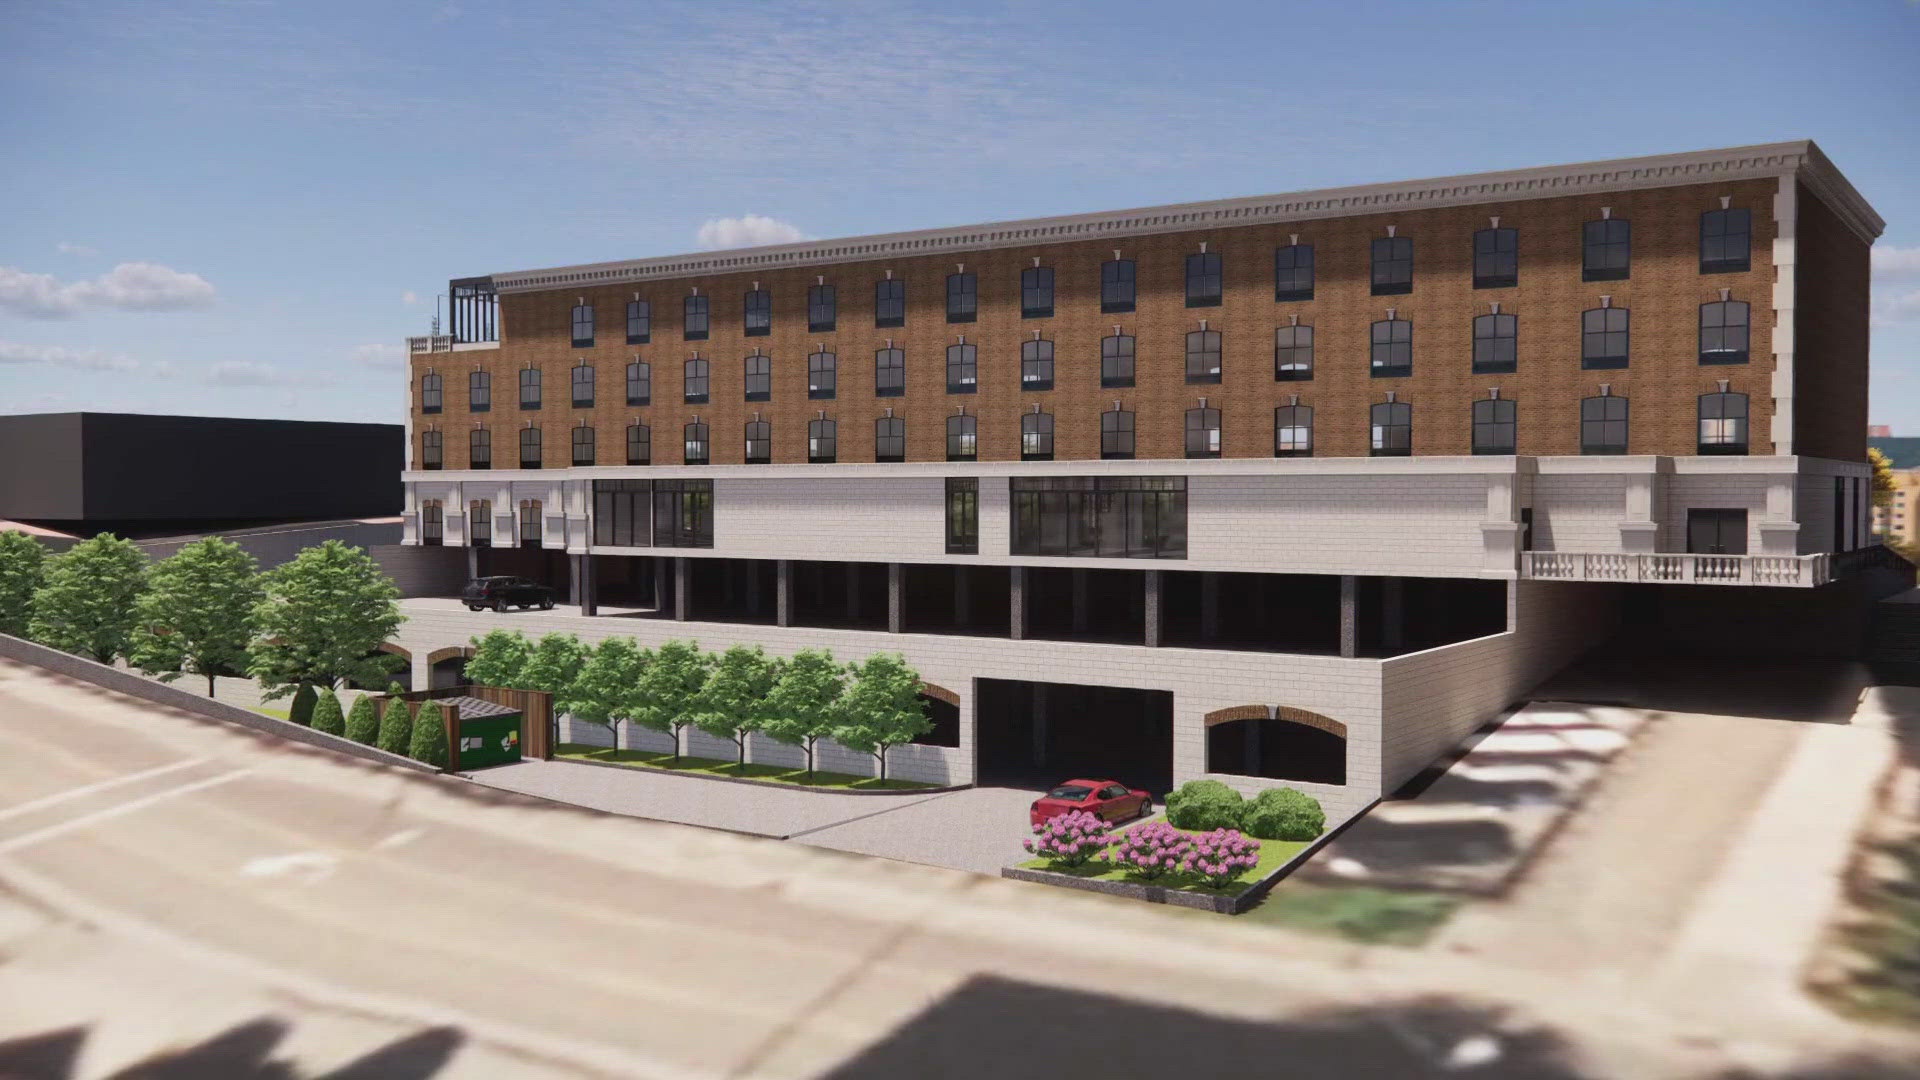 According to the developer, the 100-room Holiday Inn will feature a rooftop bar.